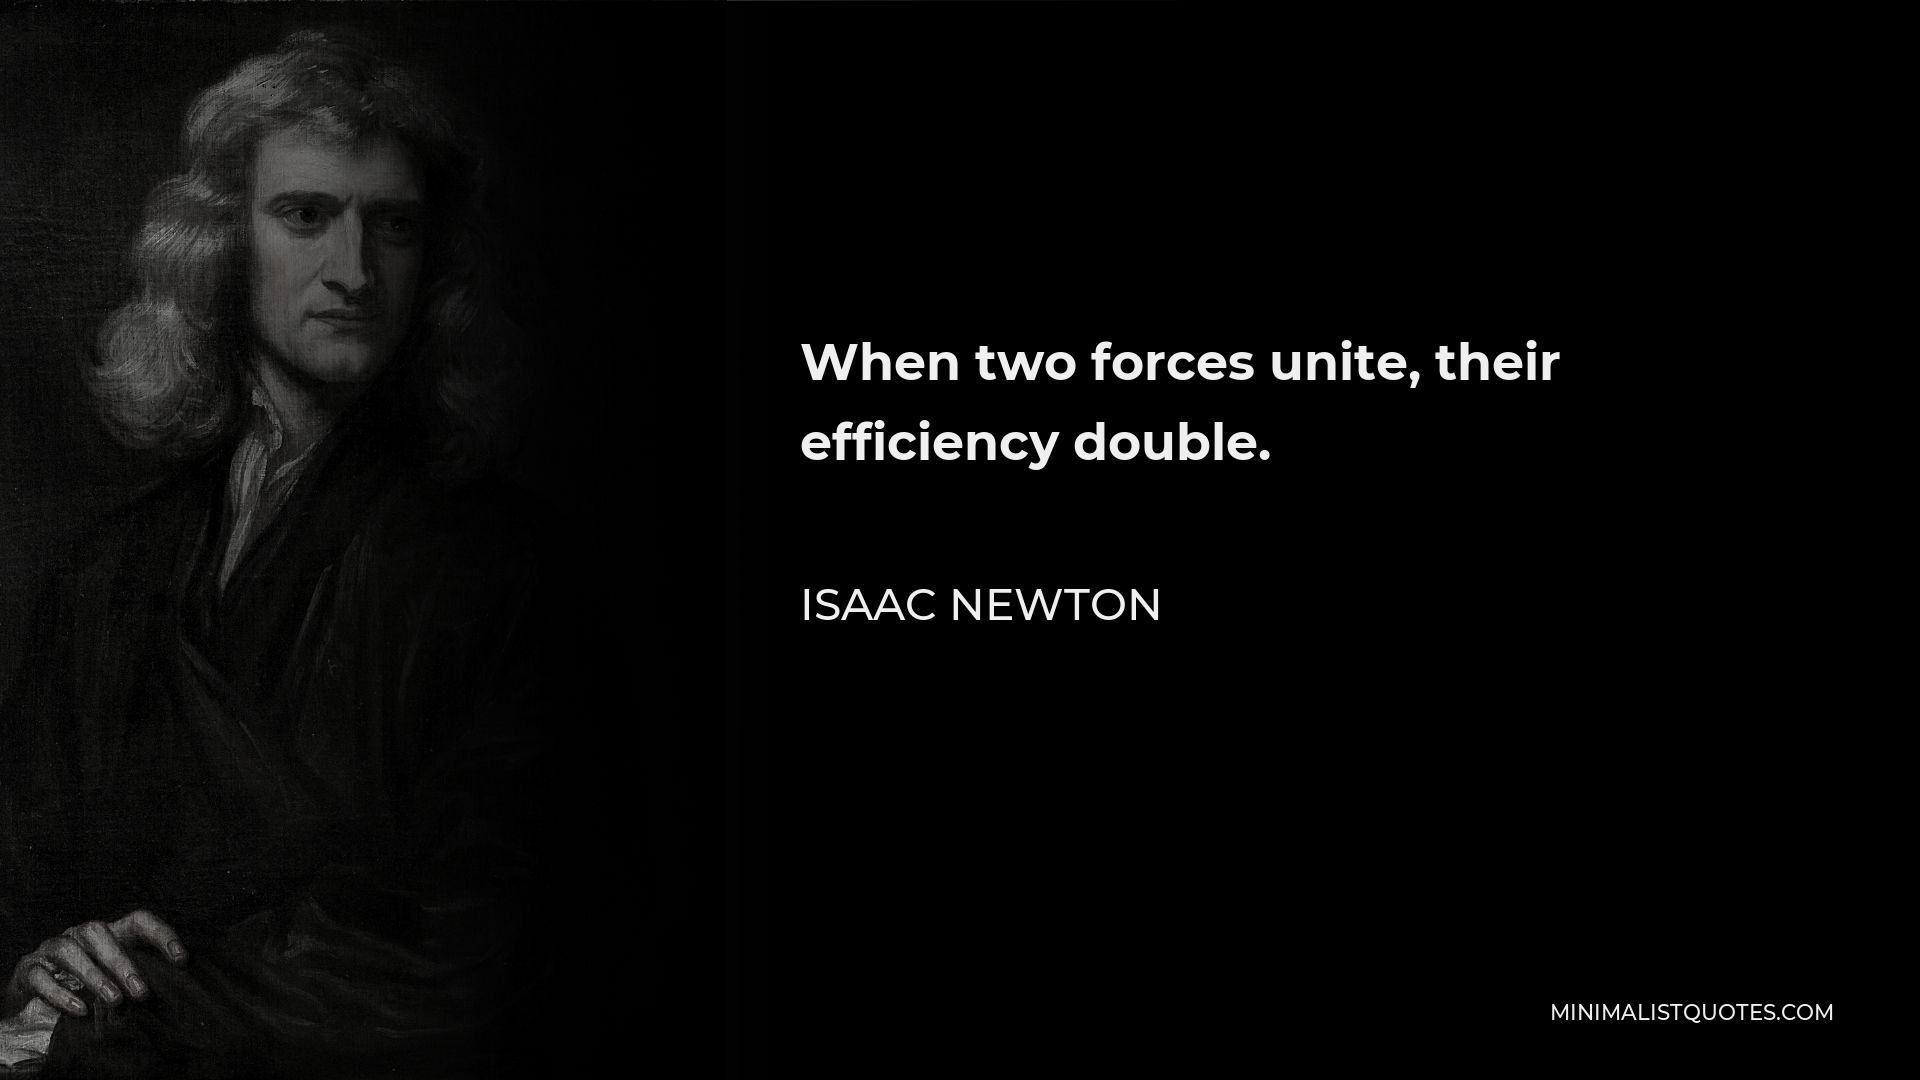 Isaac Newton Quote - When two forces unite, their efficiency double.